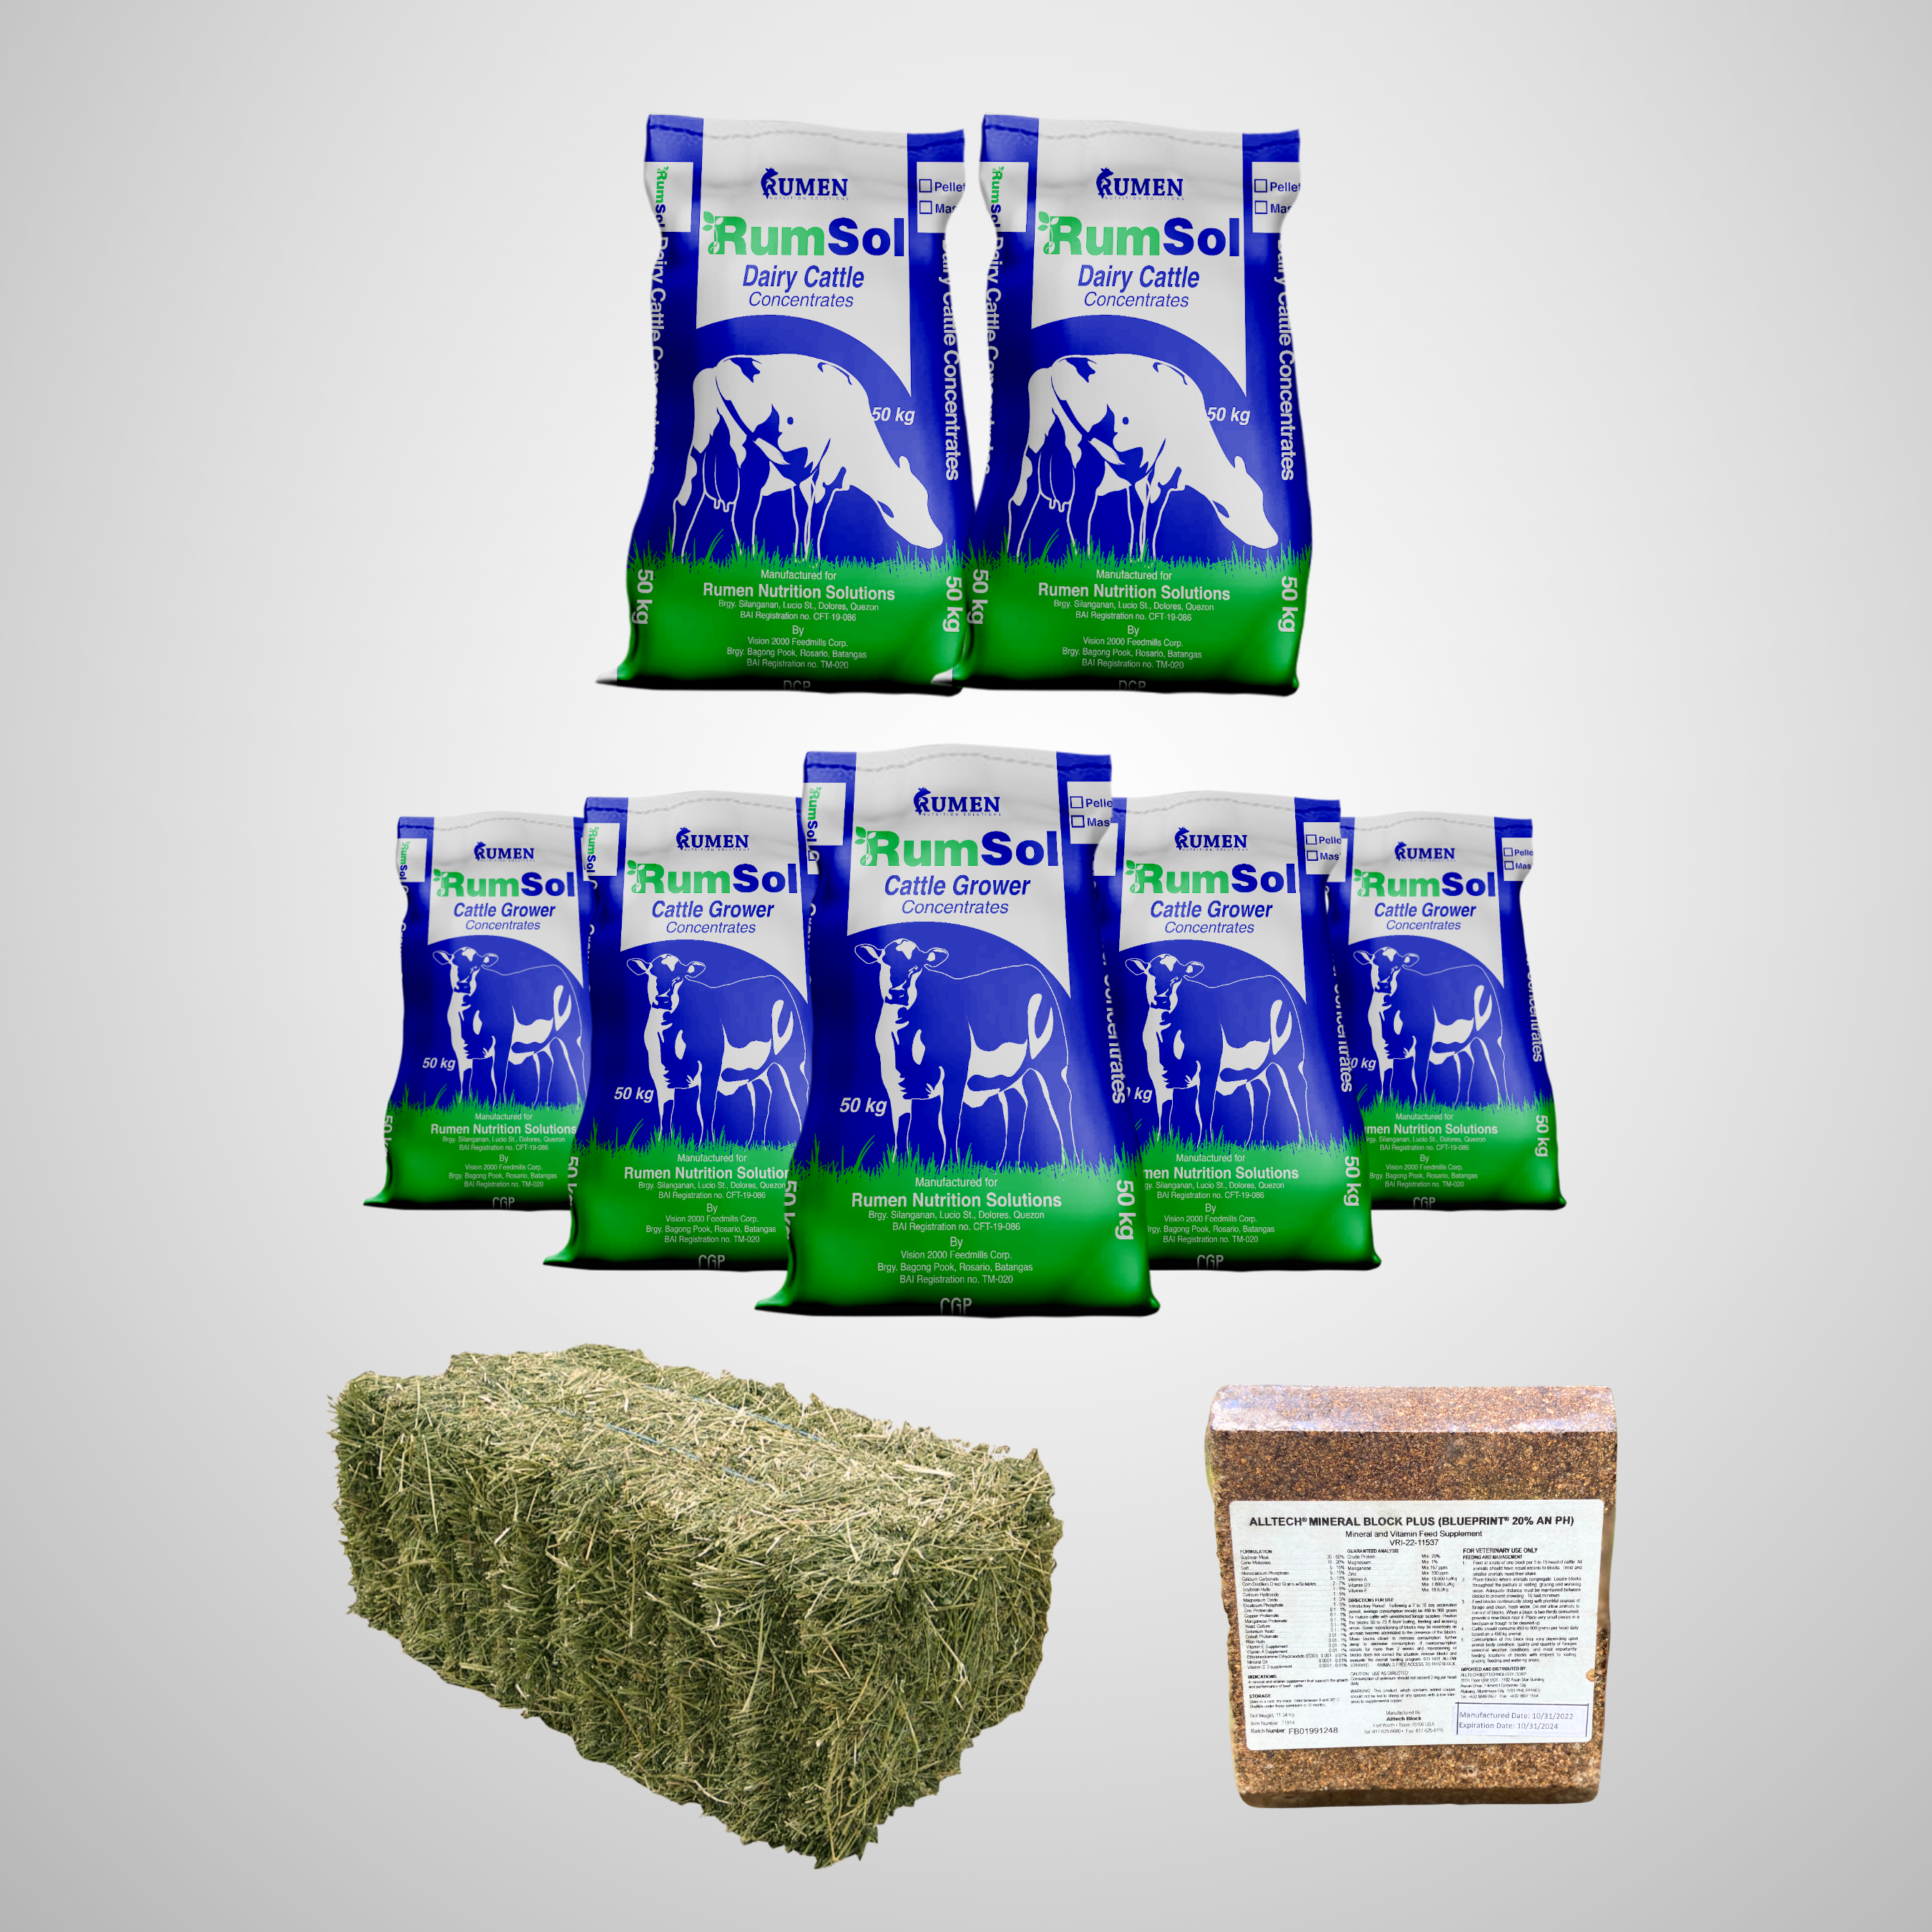 Bundle 12: Cattle Grower Concetrates, Dairy Cattle Concentrates, Alfalfa Hay & Alltech Blocks